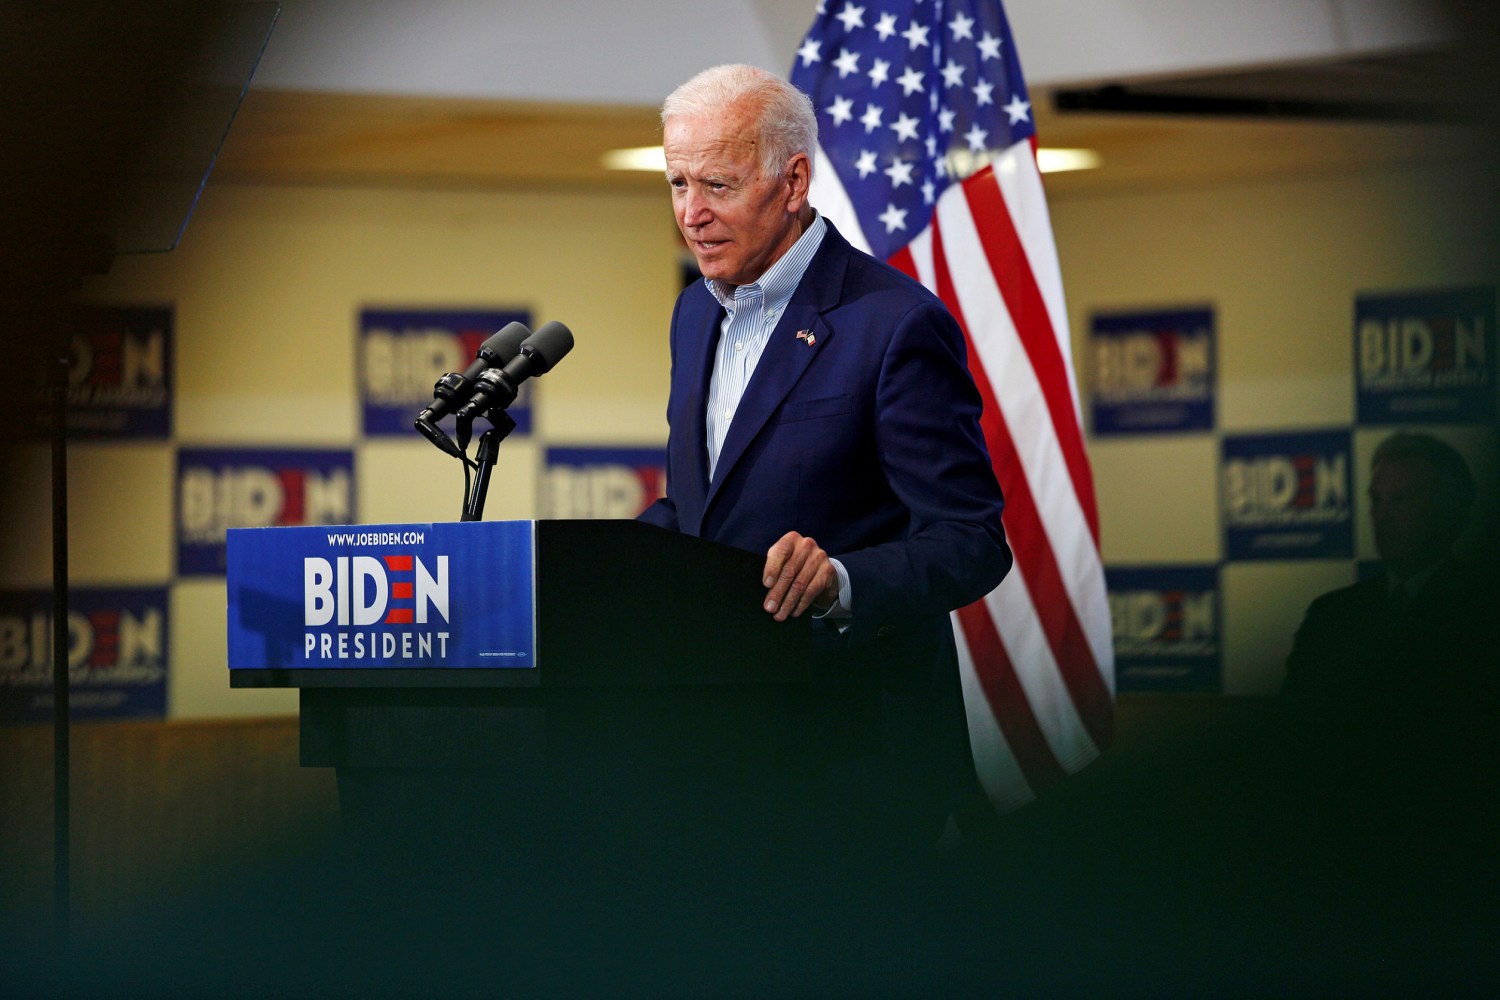 Democratic 2020 U.S. presidential candidate and former Vice President Joe Biden speaks at an event at the Mississippi Valley Fairgrounds in Davenport, Iowa, U.S. June 11, 2019.  REUTERS/Jordan Gale - RC1849B52340